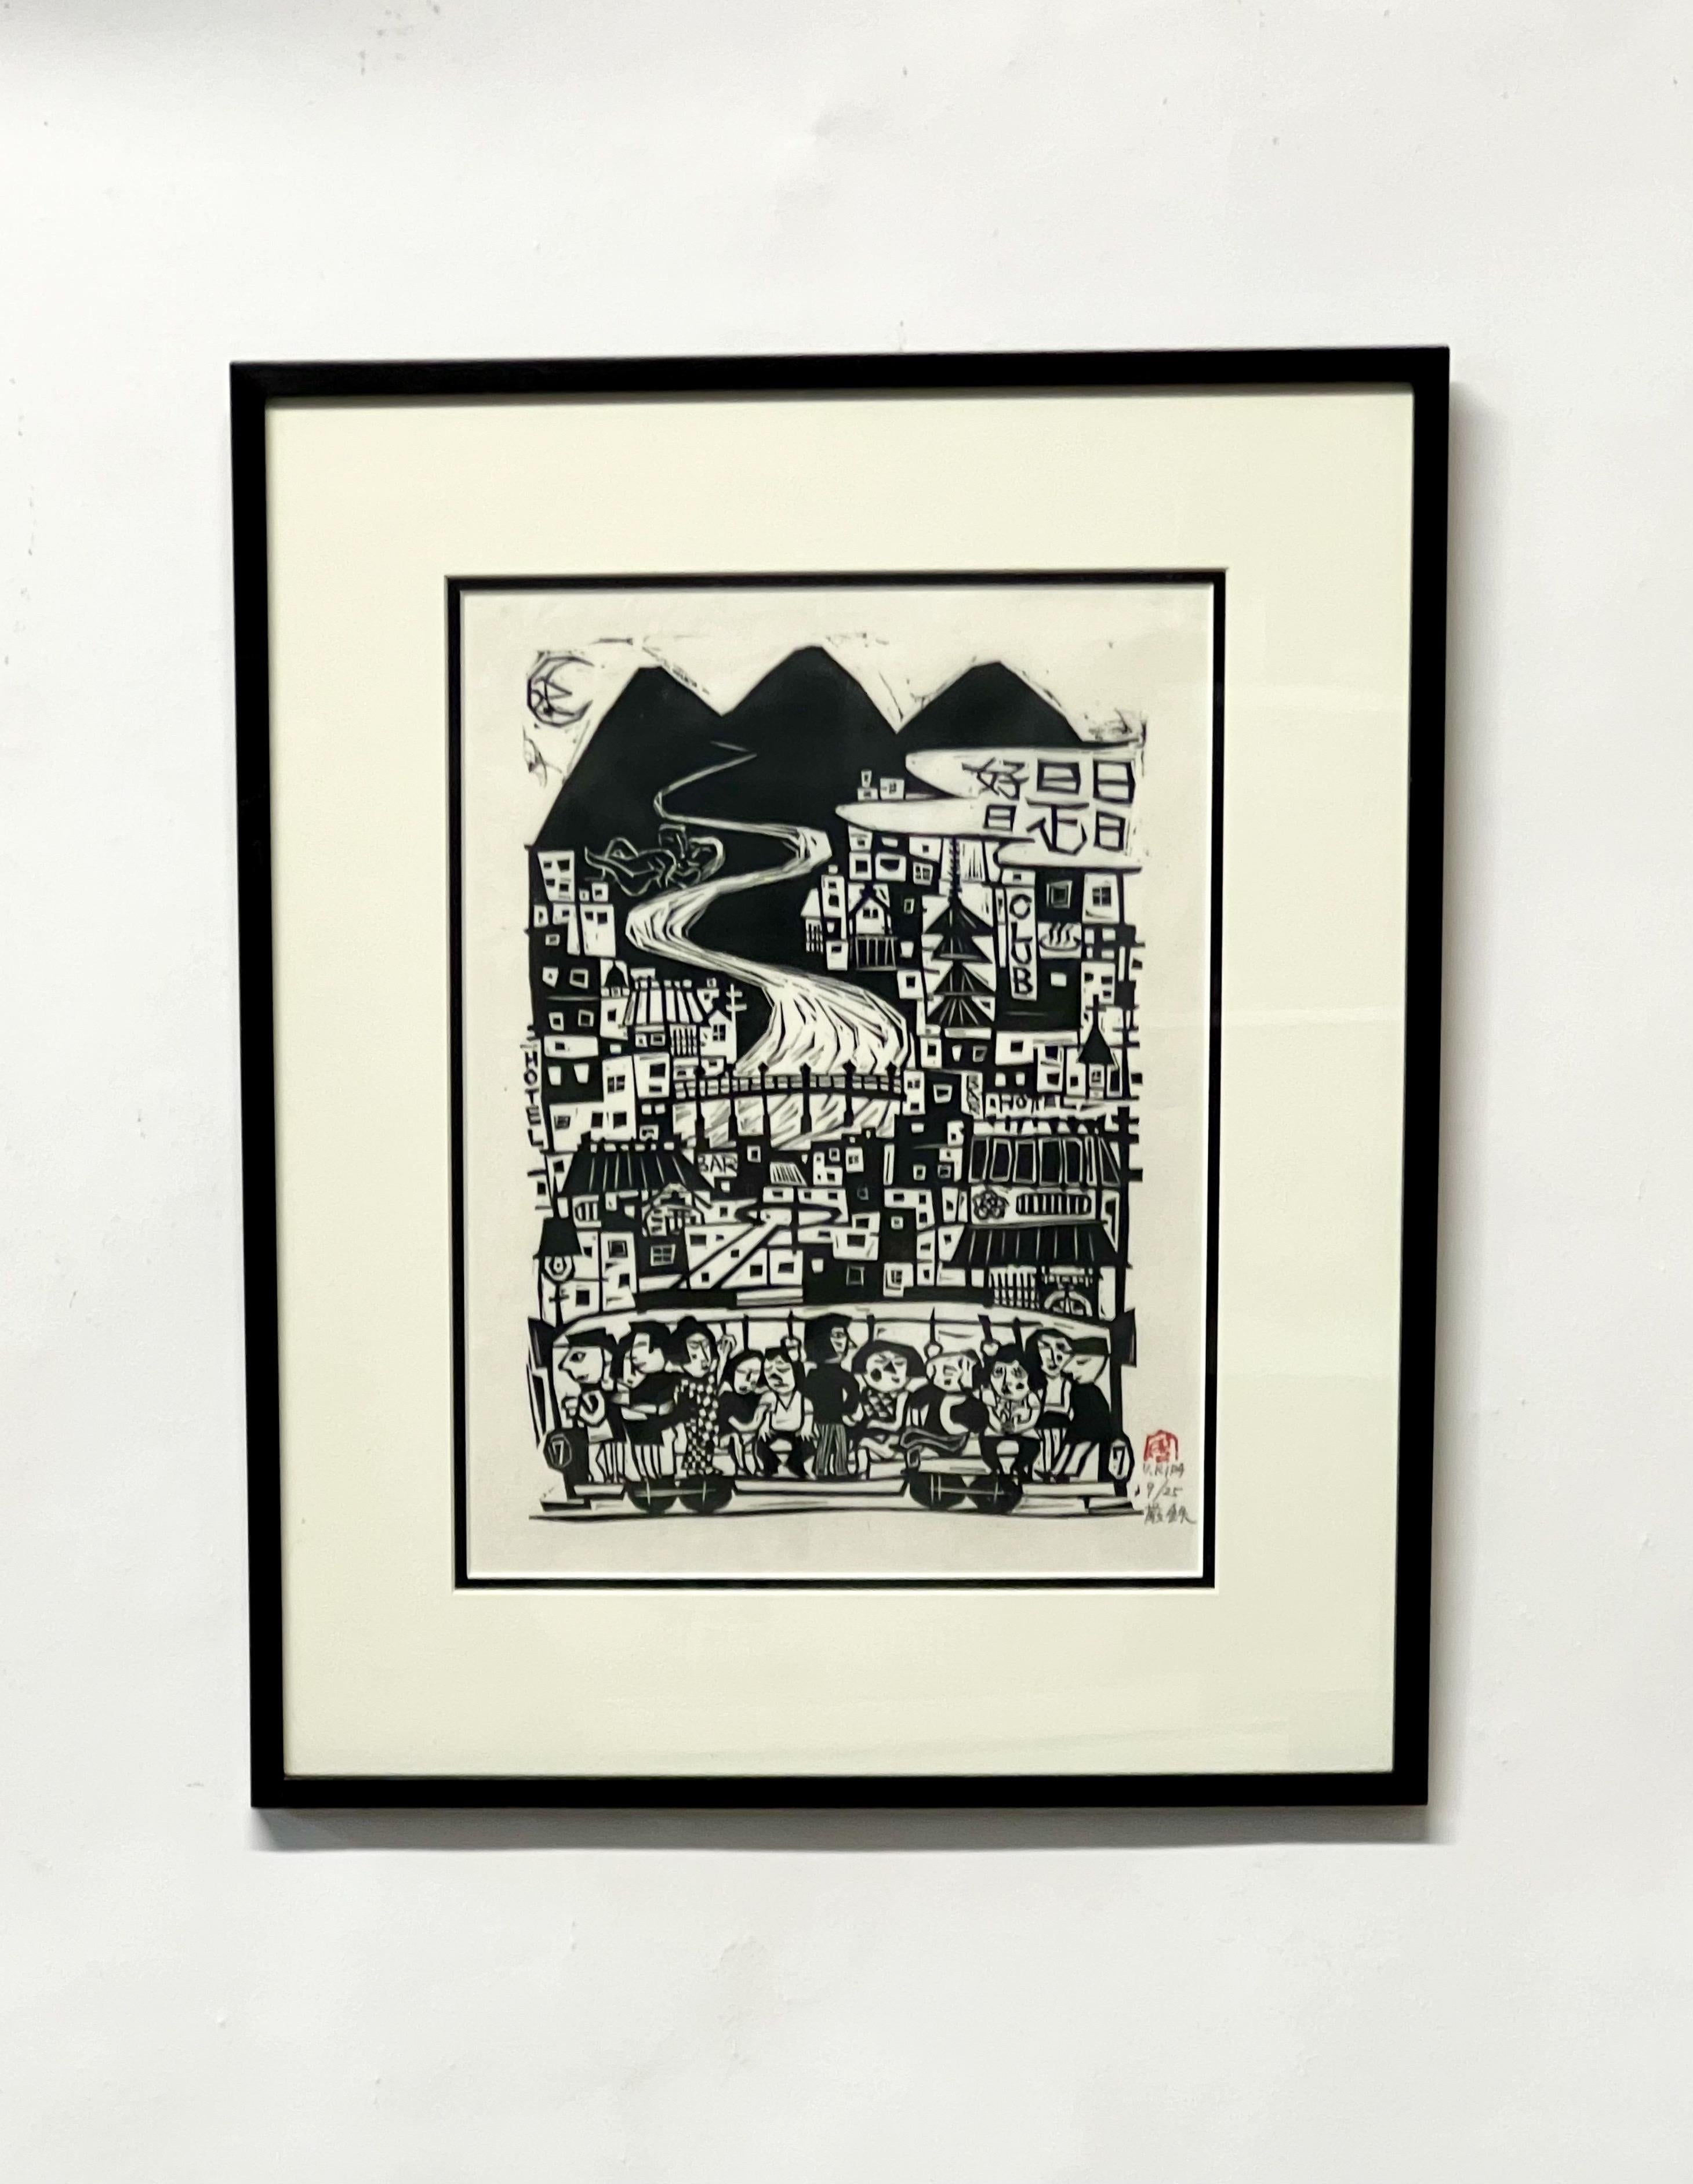 Rare small edition woodblock by famous artist, Kida Yasihiko c1970s. Many books are written about Yasihiko, and his art works are very hard to find. This one is fantastic. So much happening in this lively mountain town. Signed in pencil by artist,